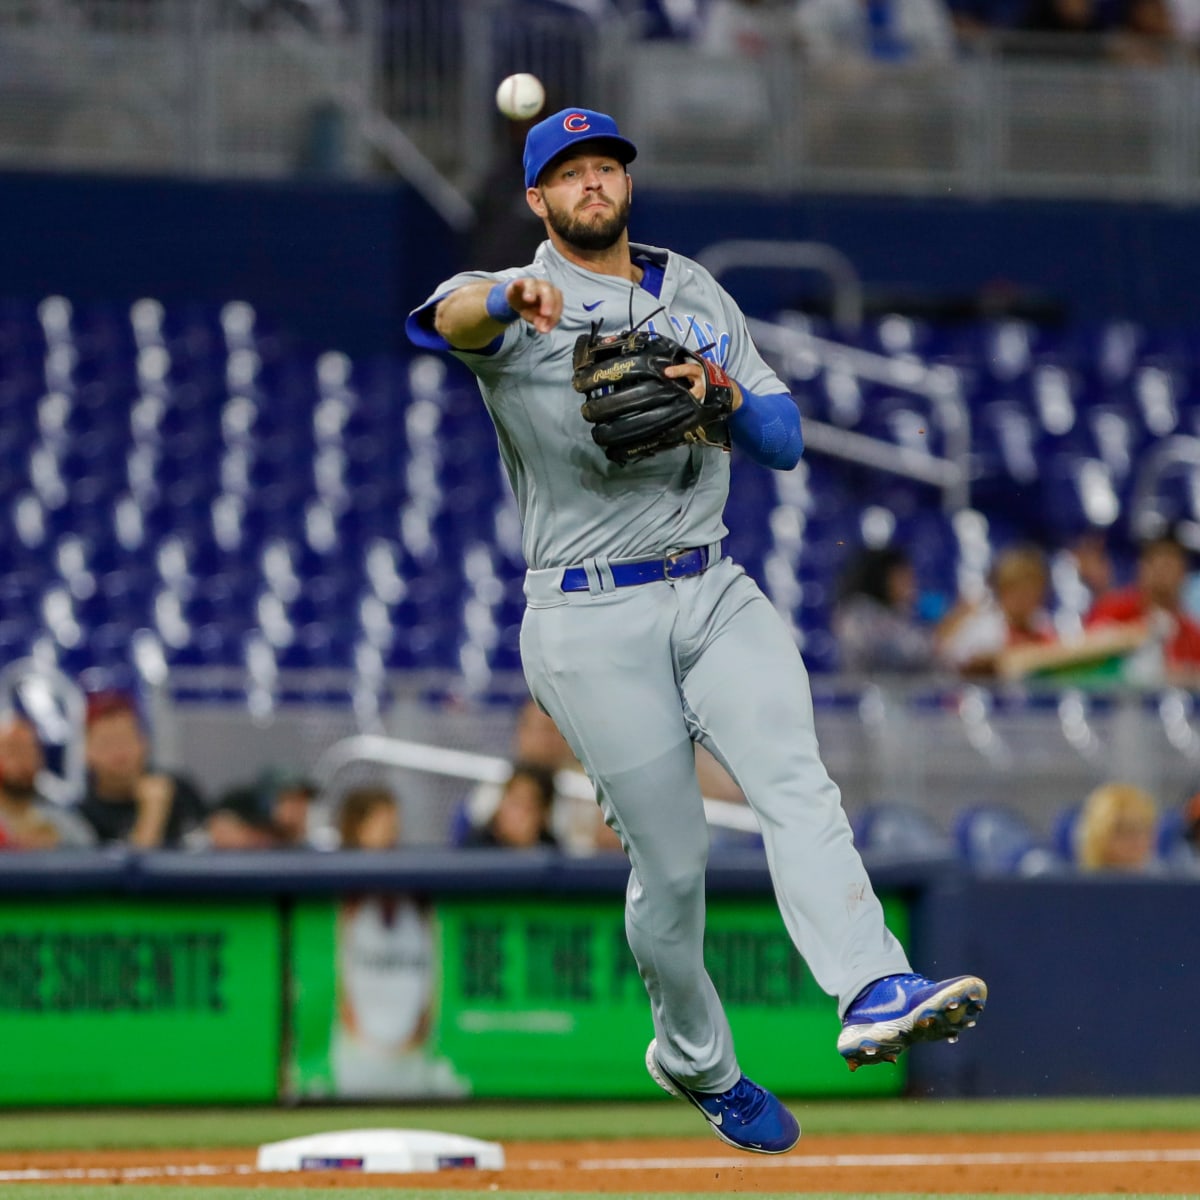 Cubs vs. Pirates MLB 2022 live stream (7/26) How to watch online